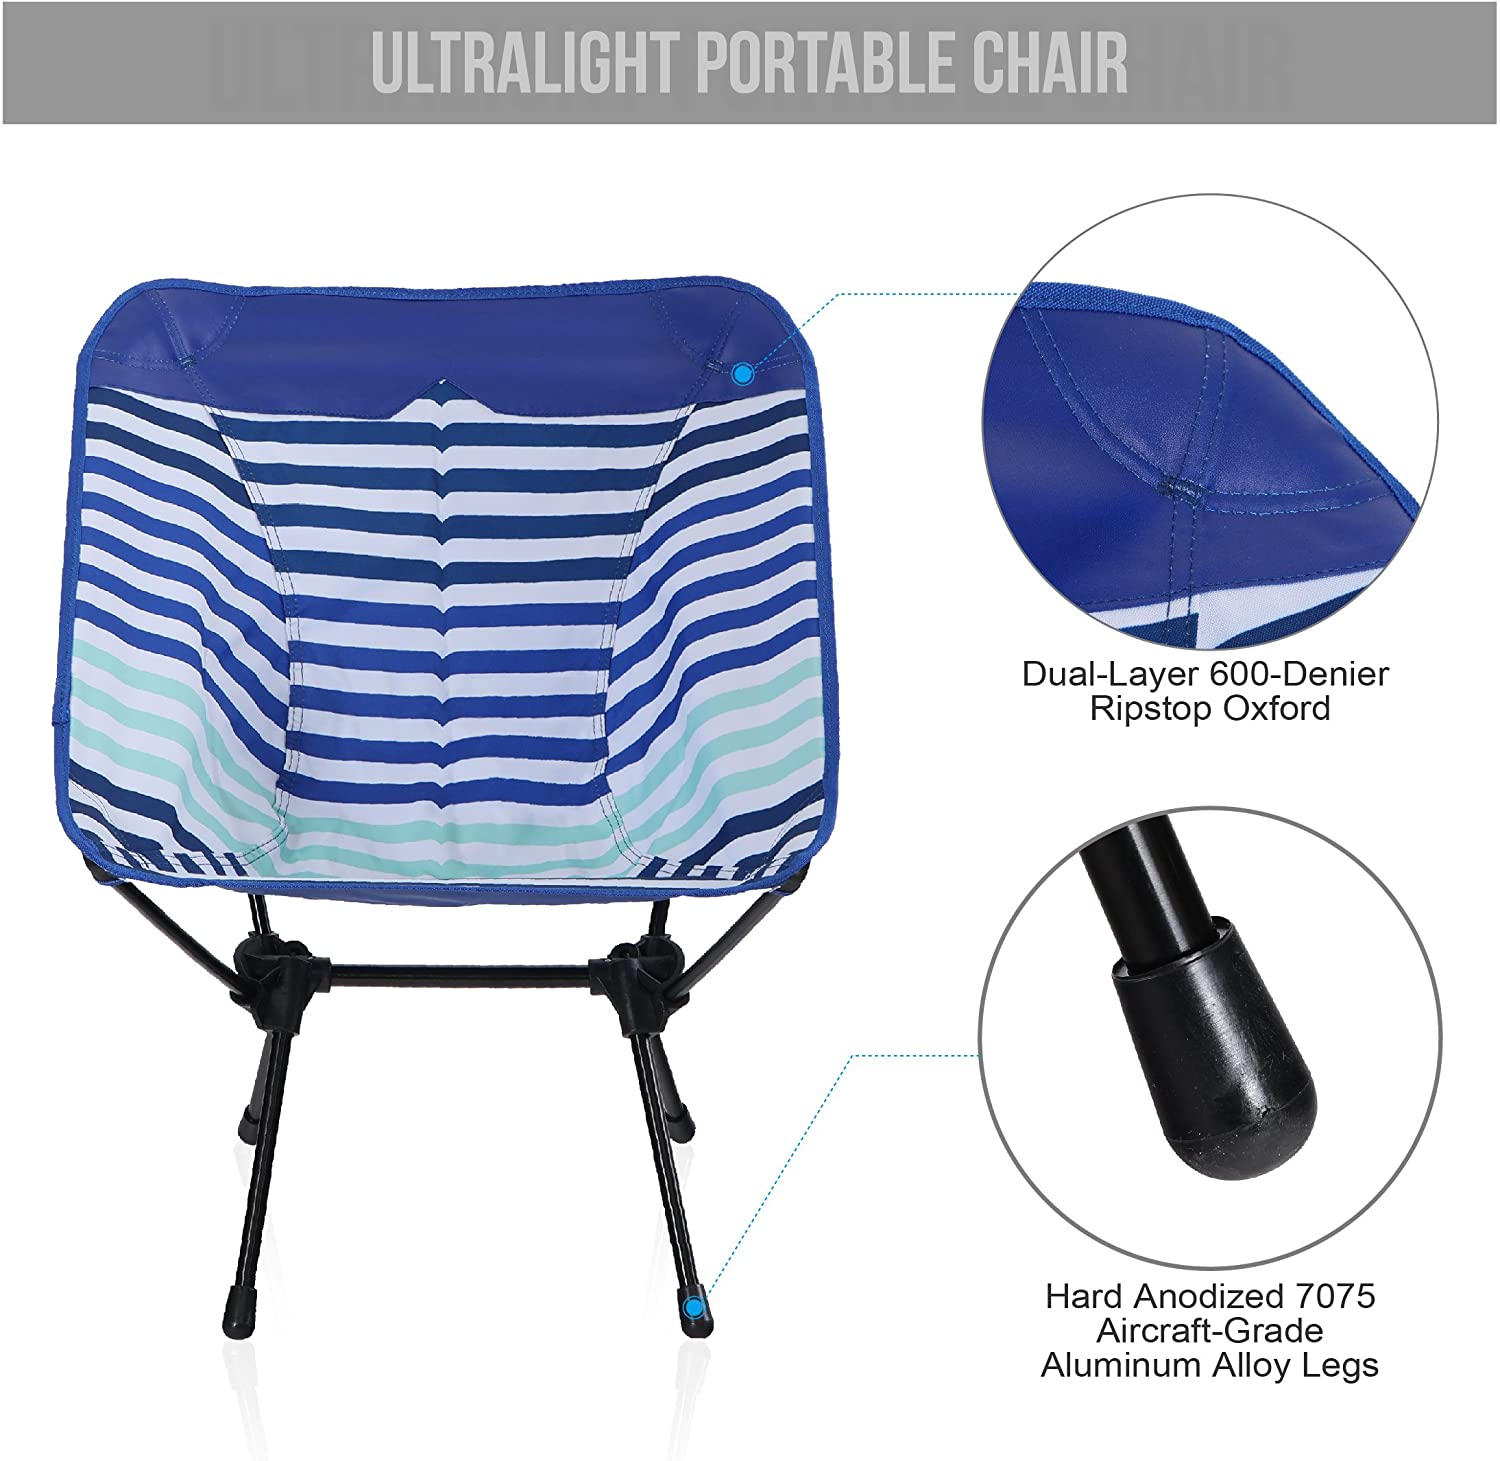 MF Studio Camping Chair Portable Ultralight Compact Folding Camping Backpack Chairs with Carry Bag Heavy Duty 225lb Capacity Compact Lightweight Folding Chair for The Outdoors, Camping, Hiking, Blue - image 2 of 7